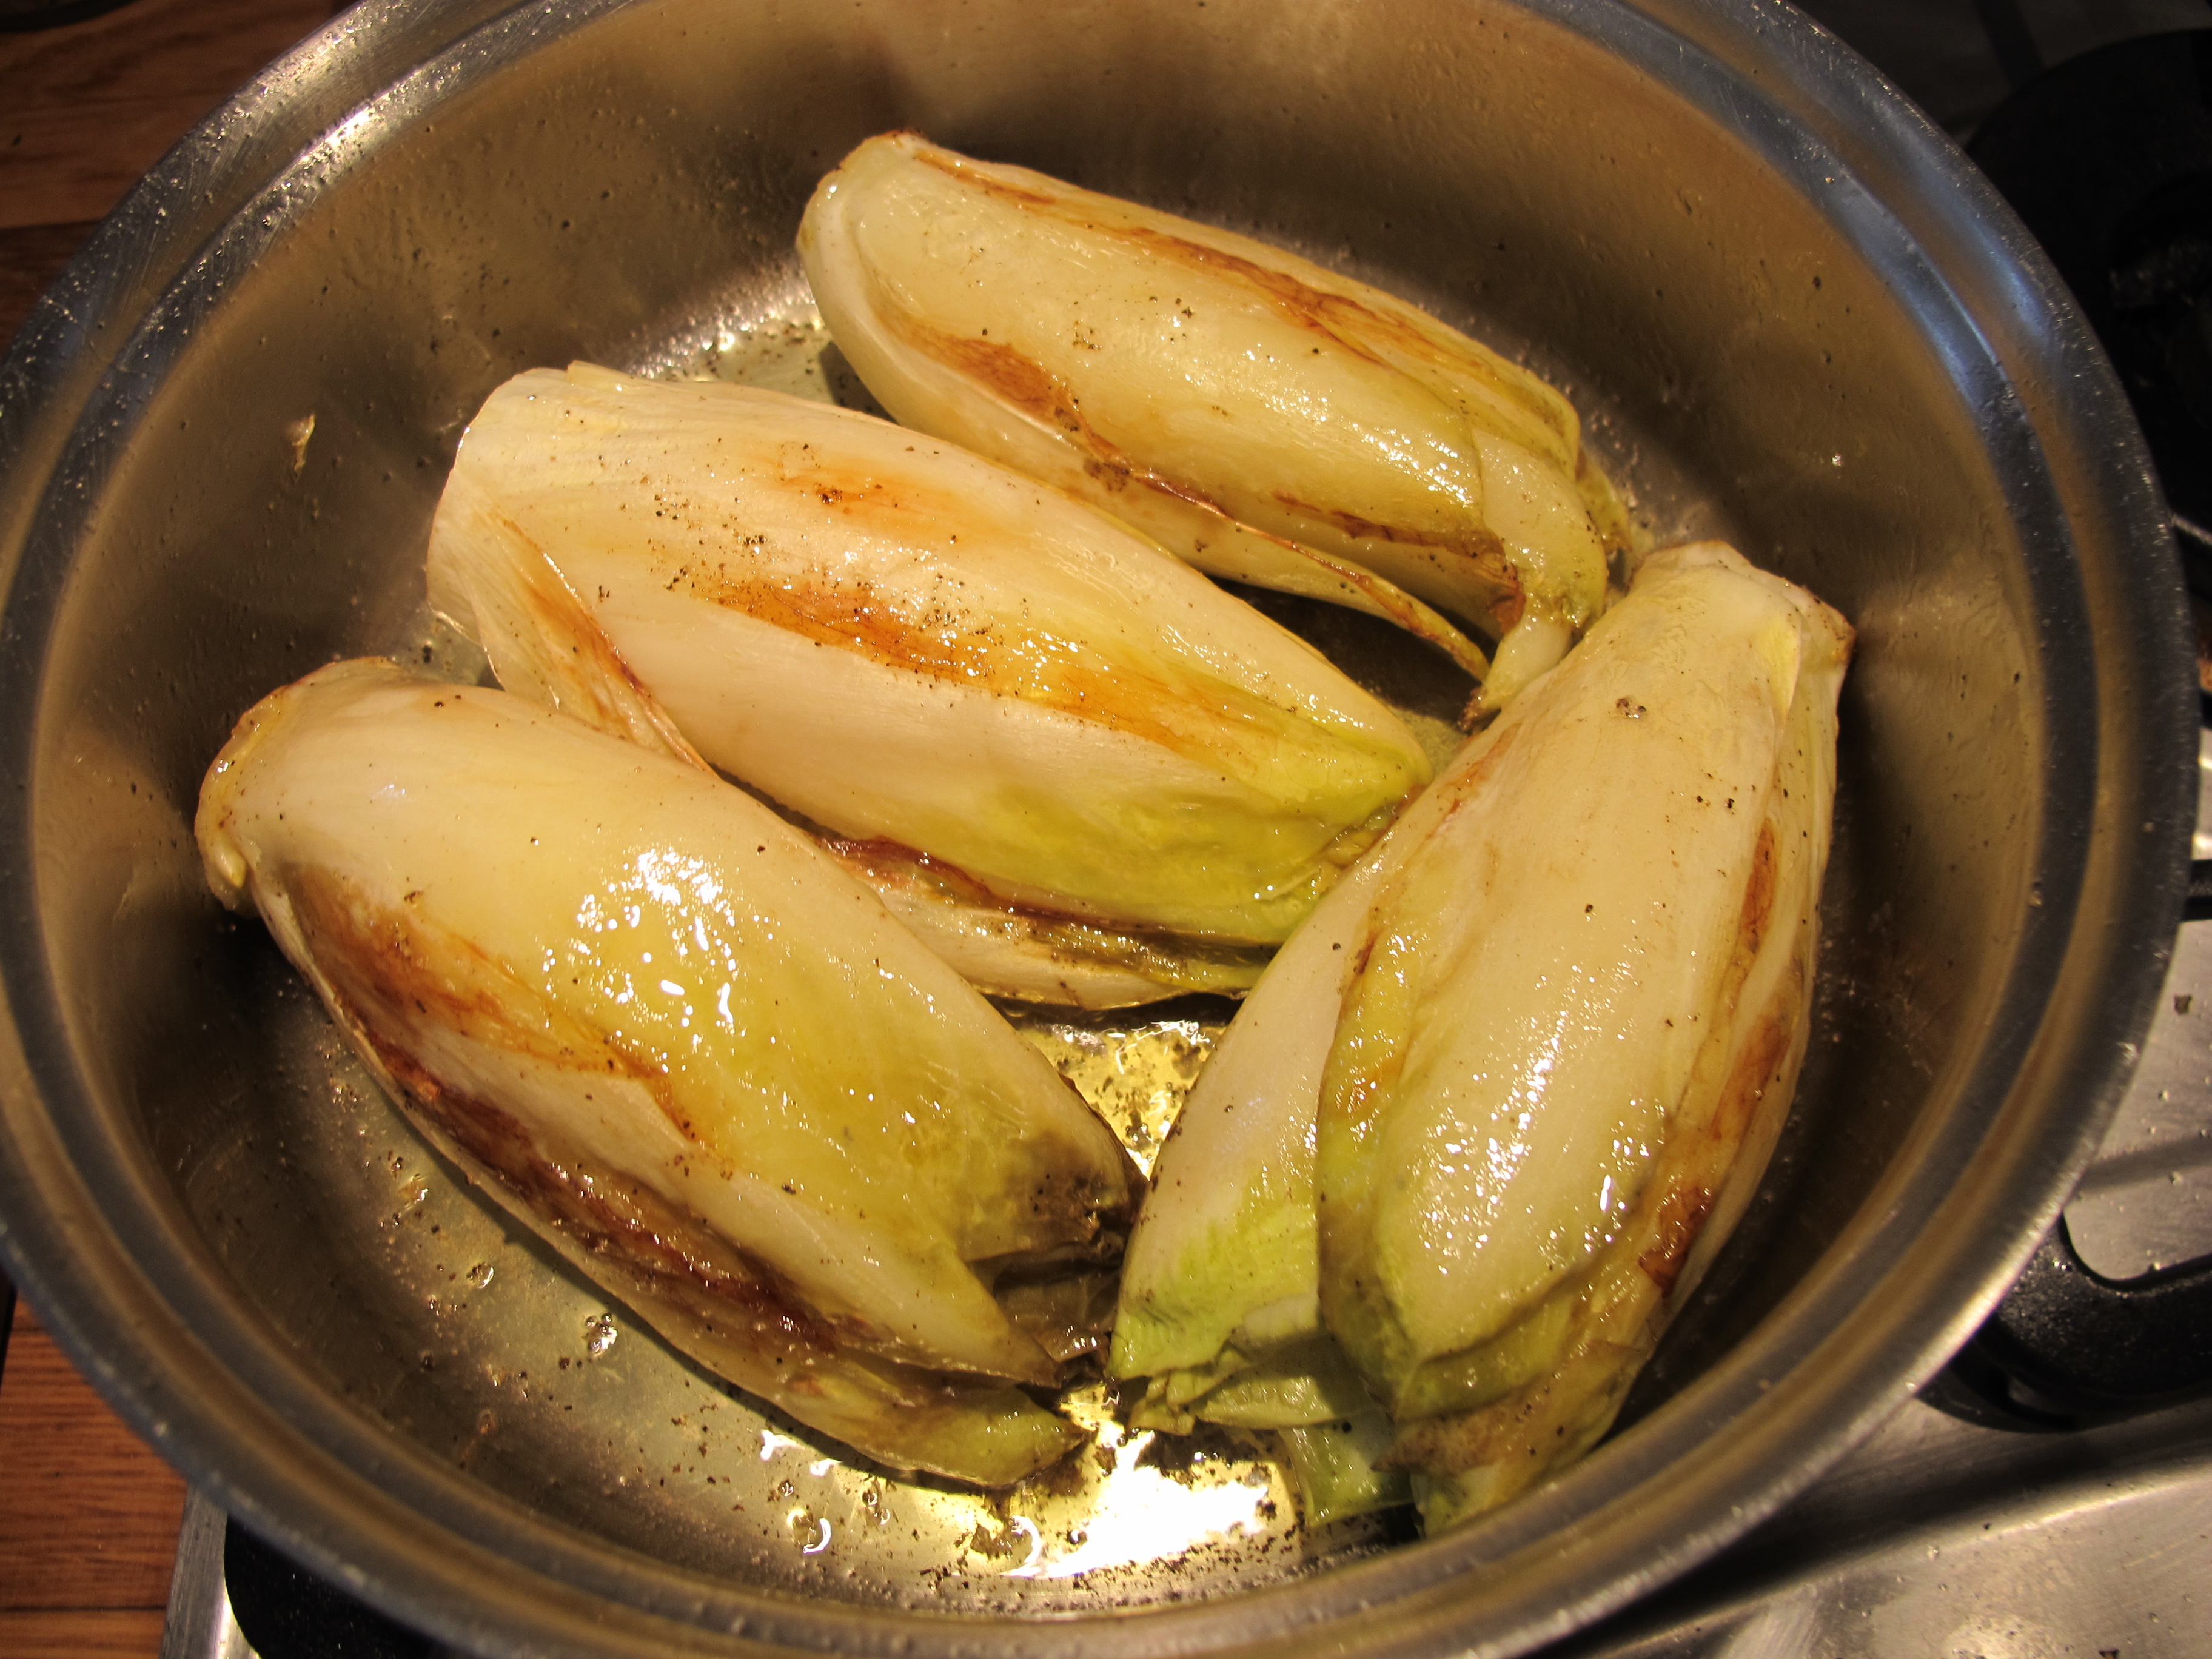 Endives (chicory) braised in honey - solo food - Recipes for One